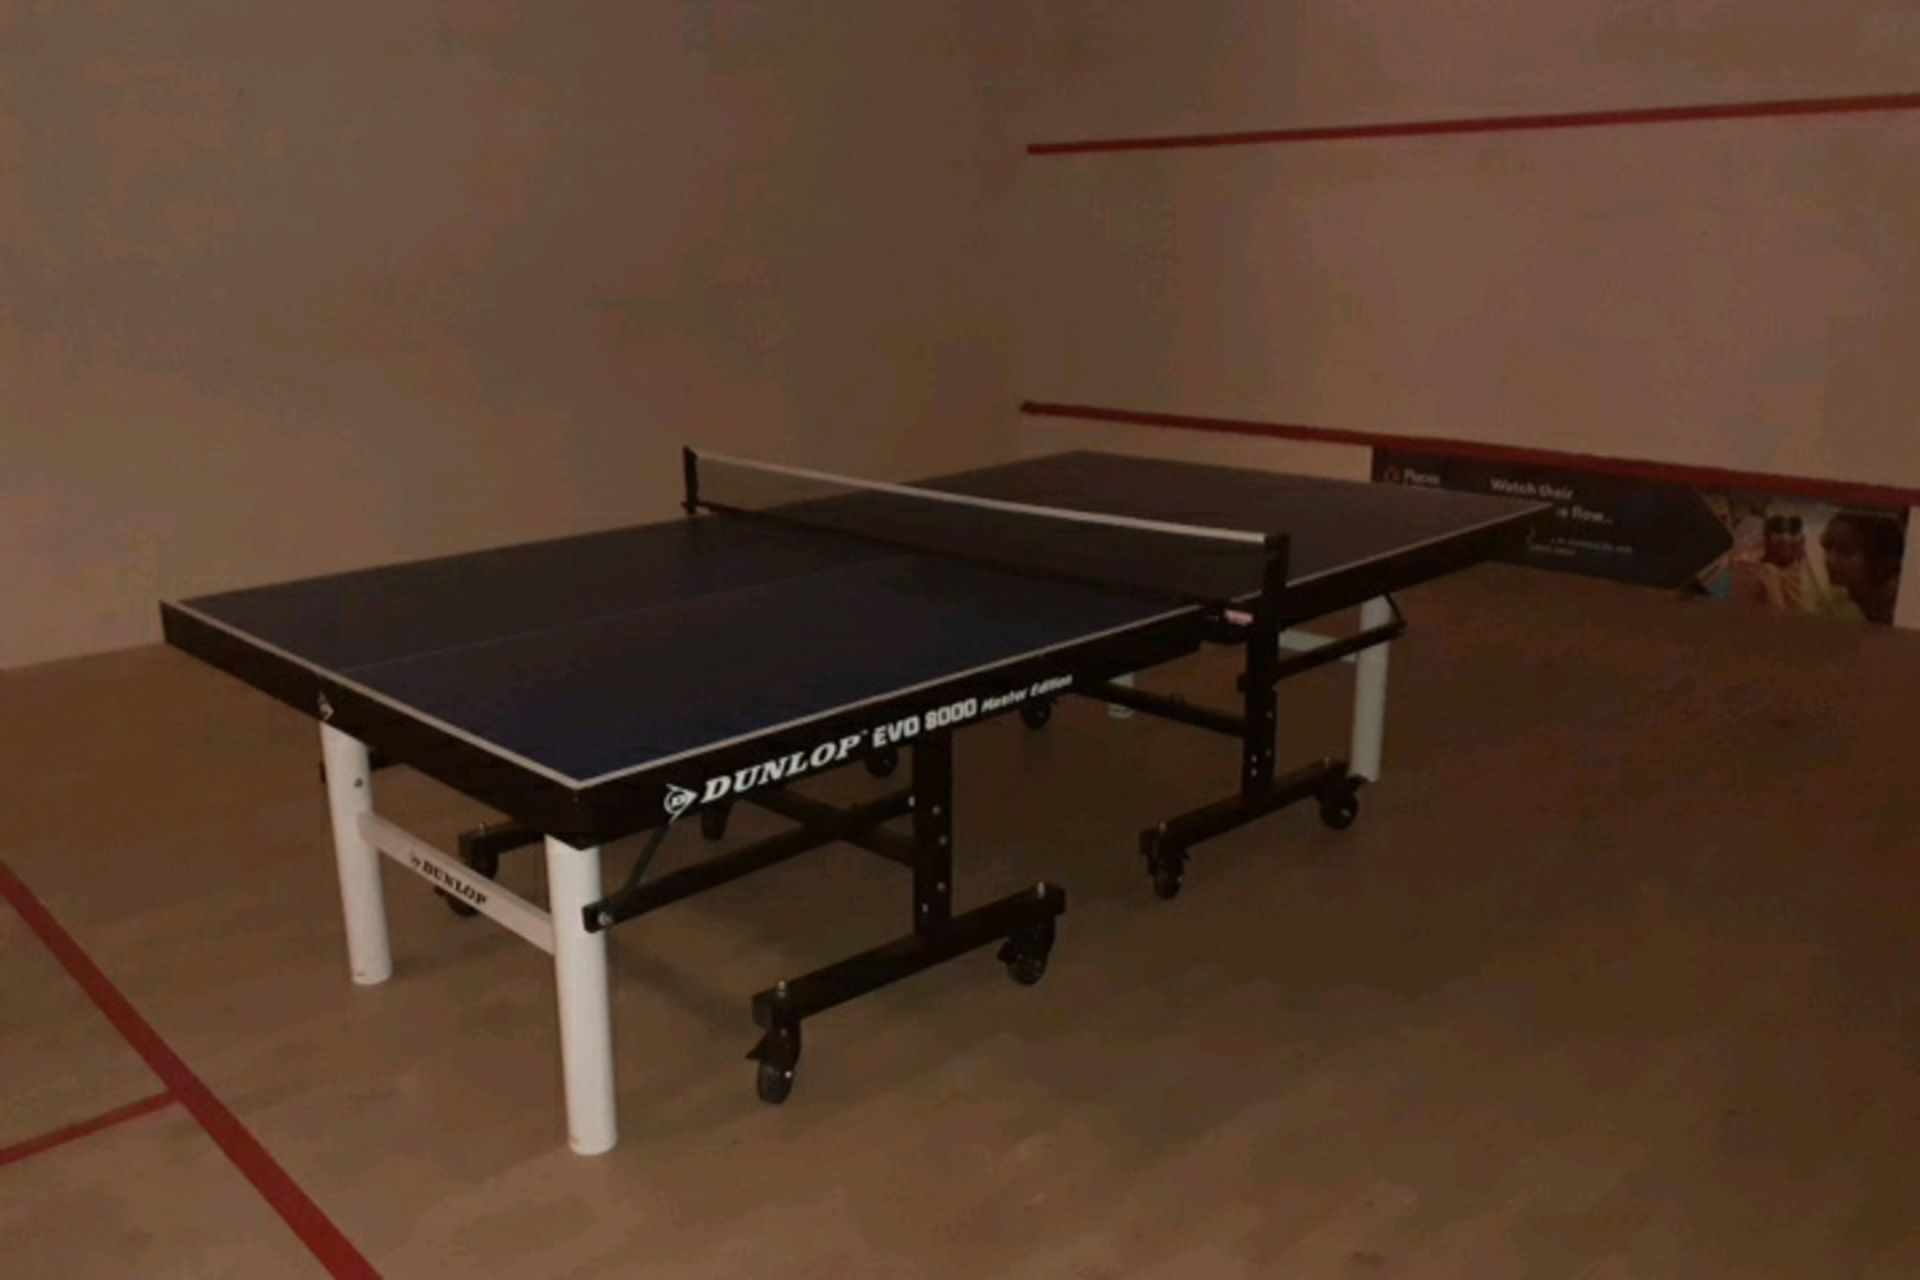 Table tennis table - Image 2 of 2